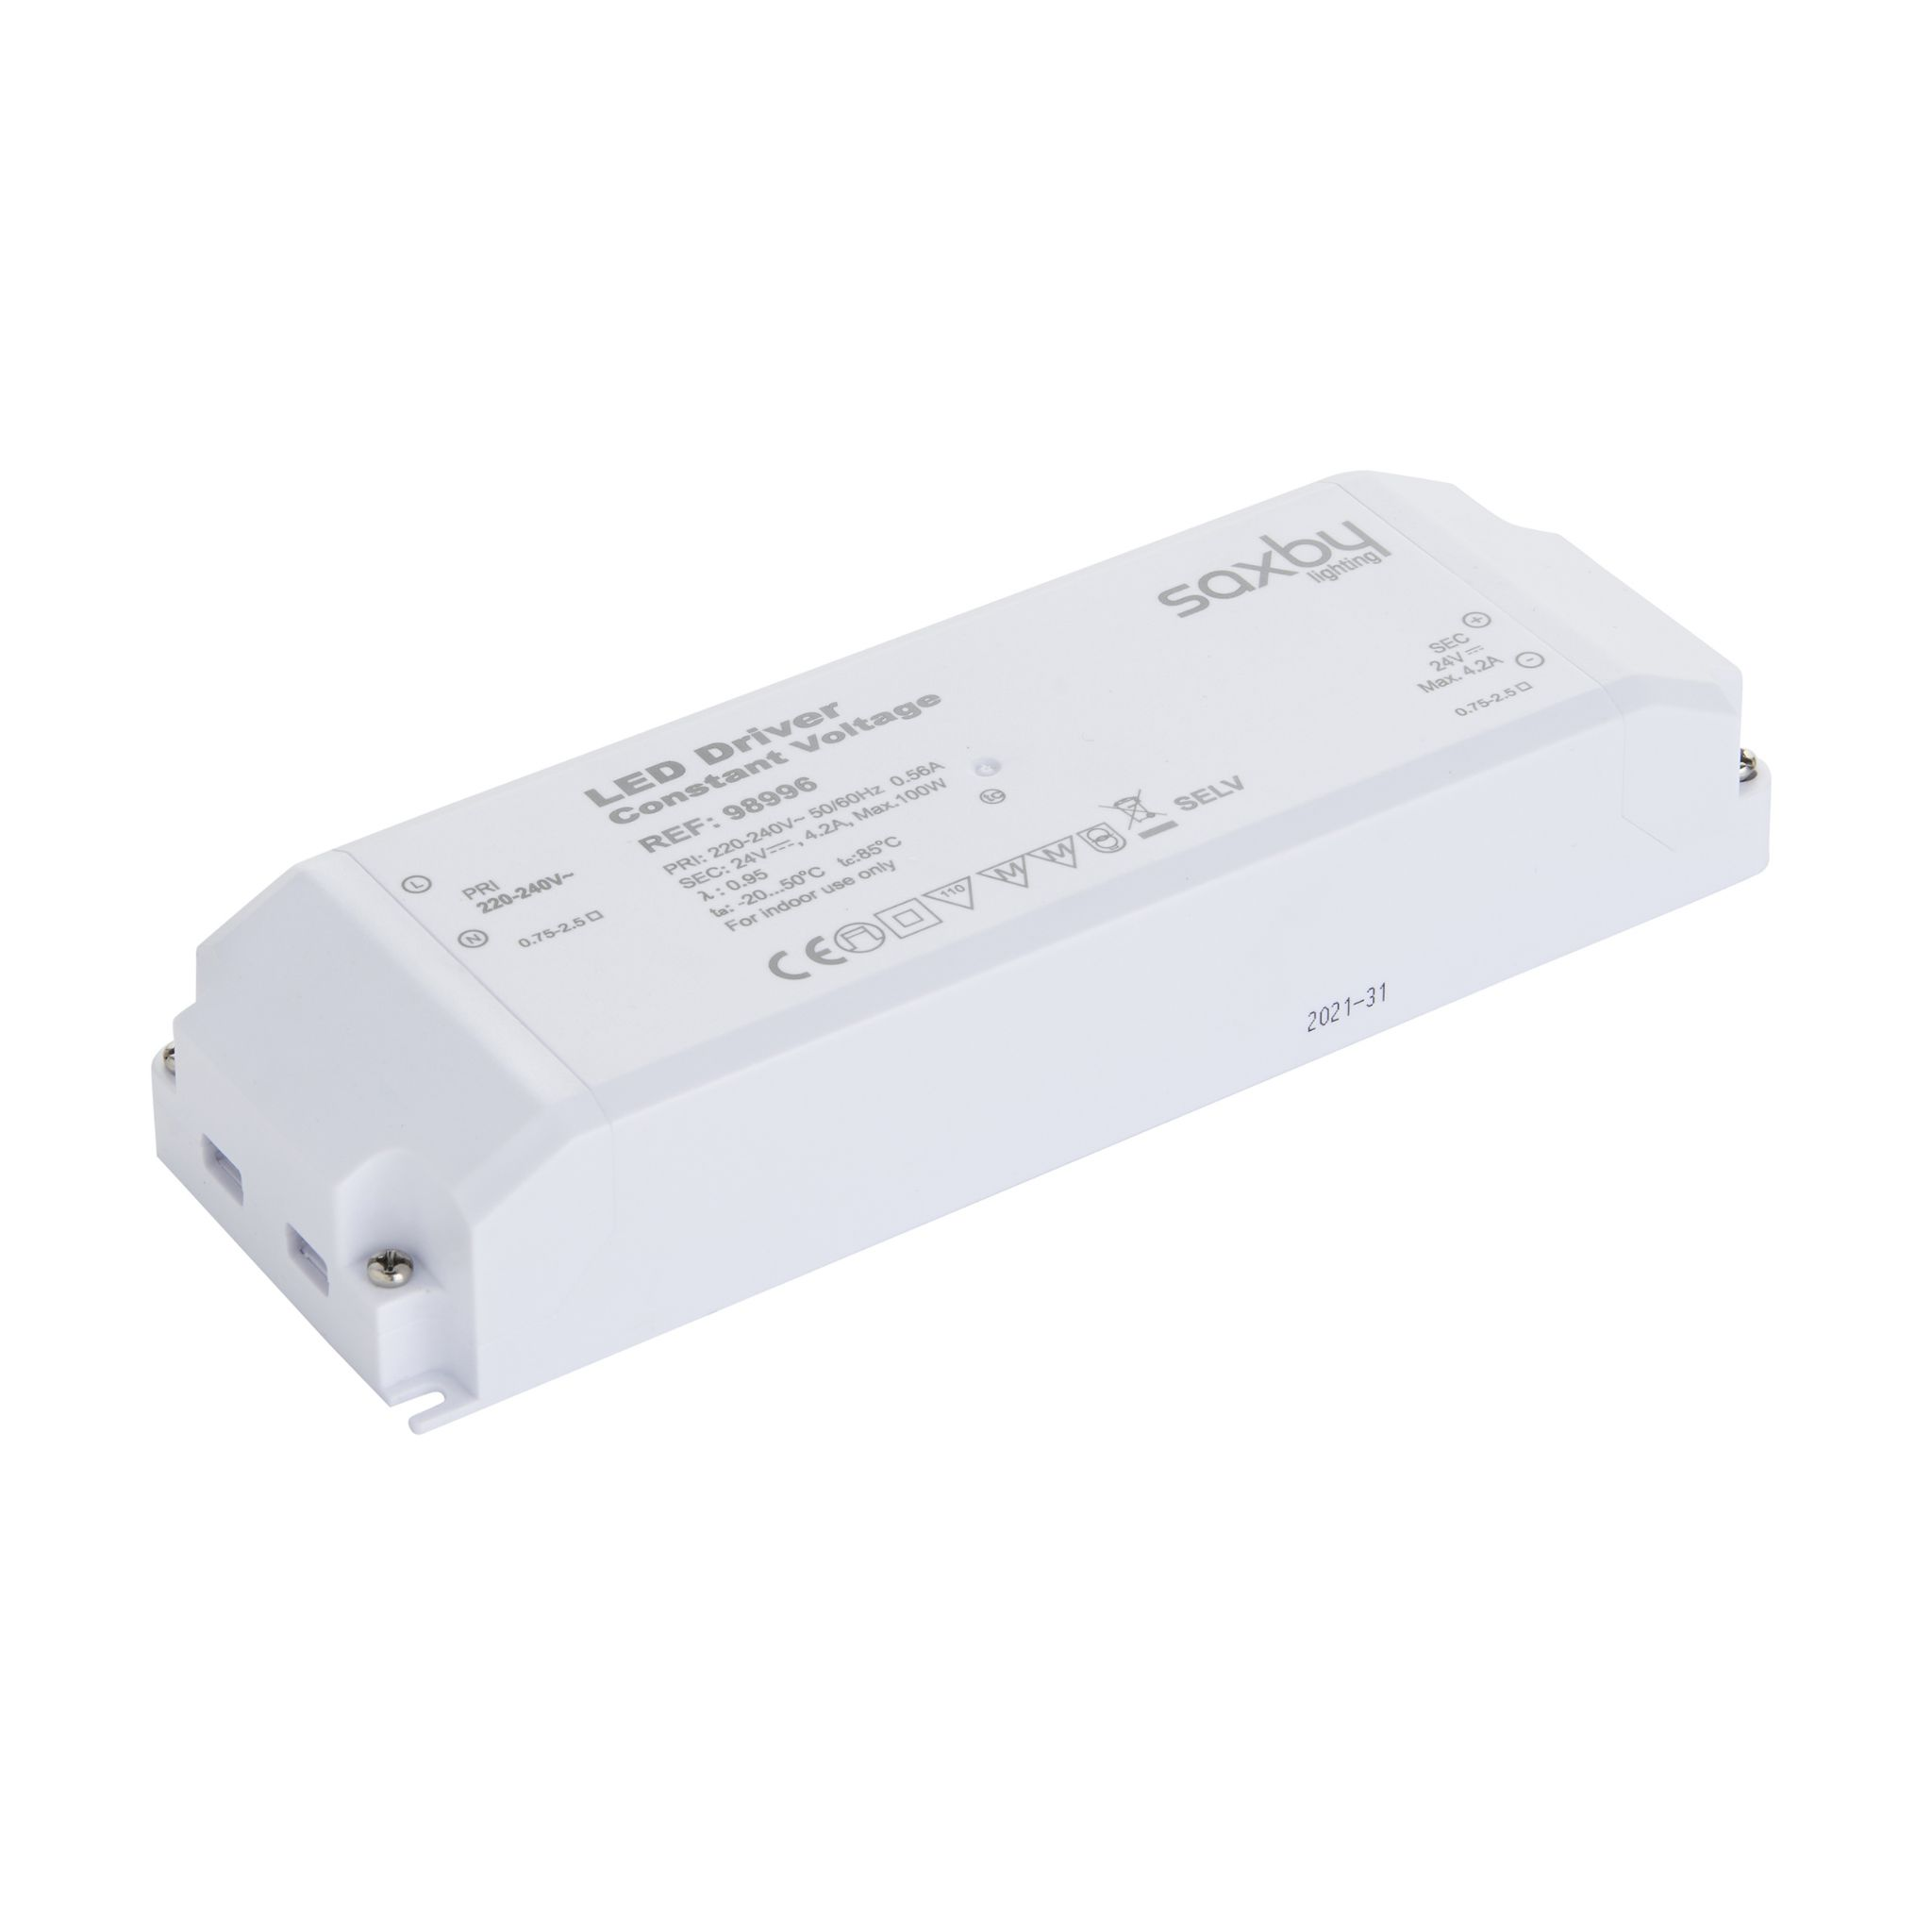 Saxby 24v 100w LED Driver Constant Voltage